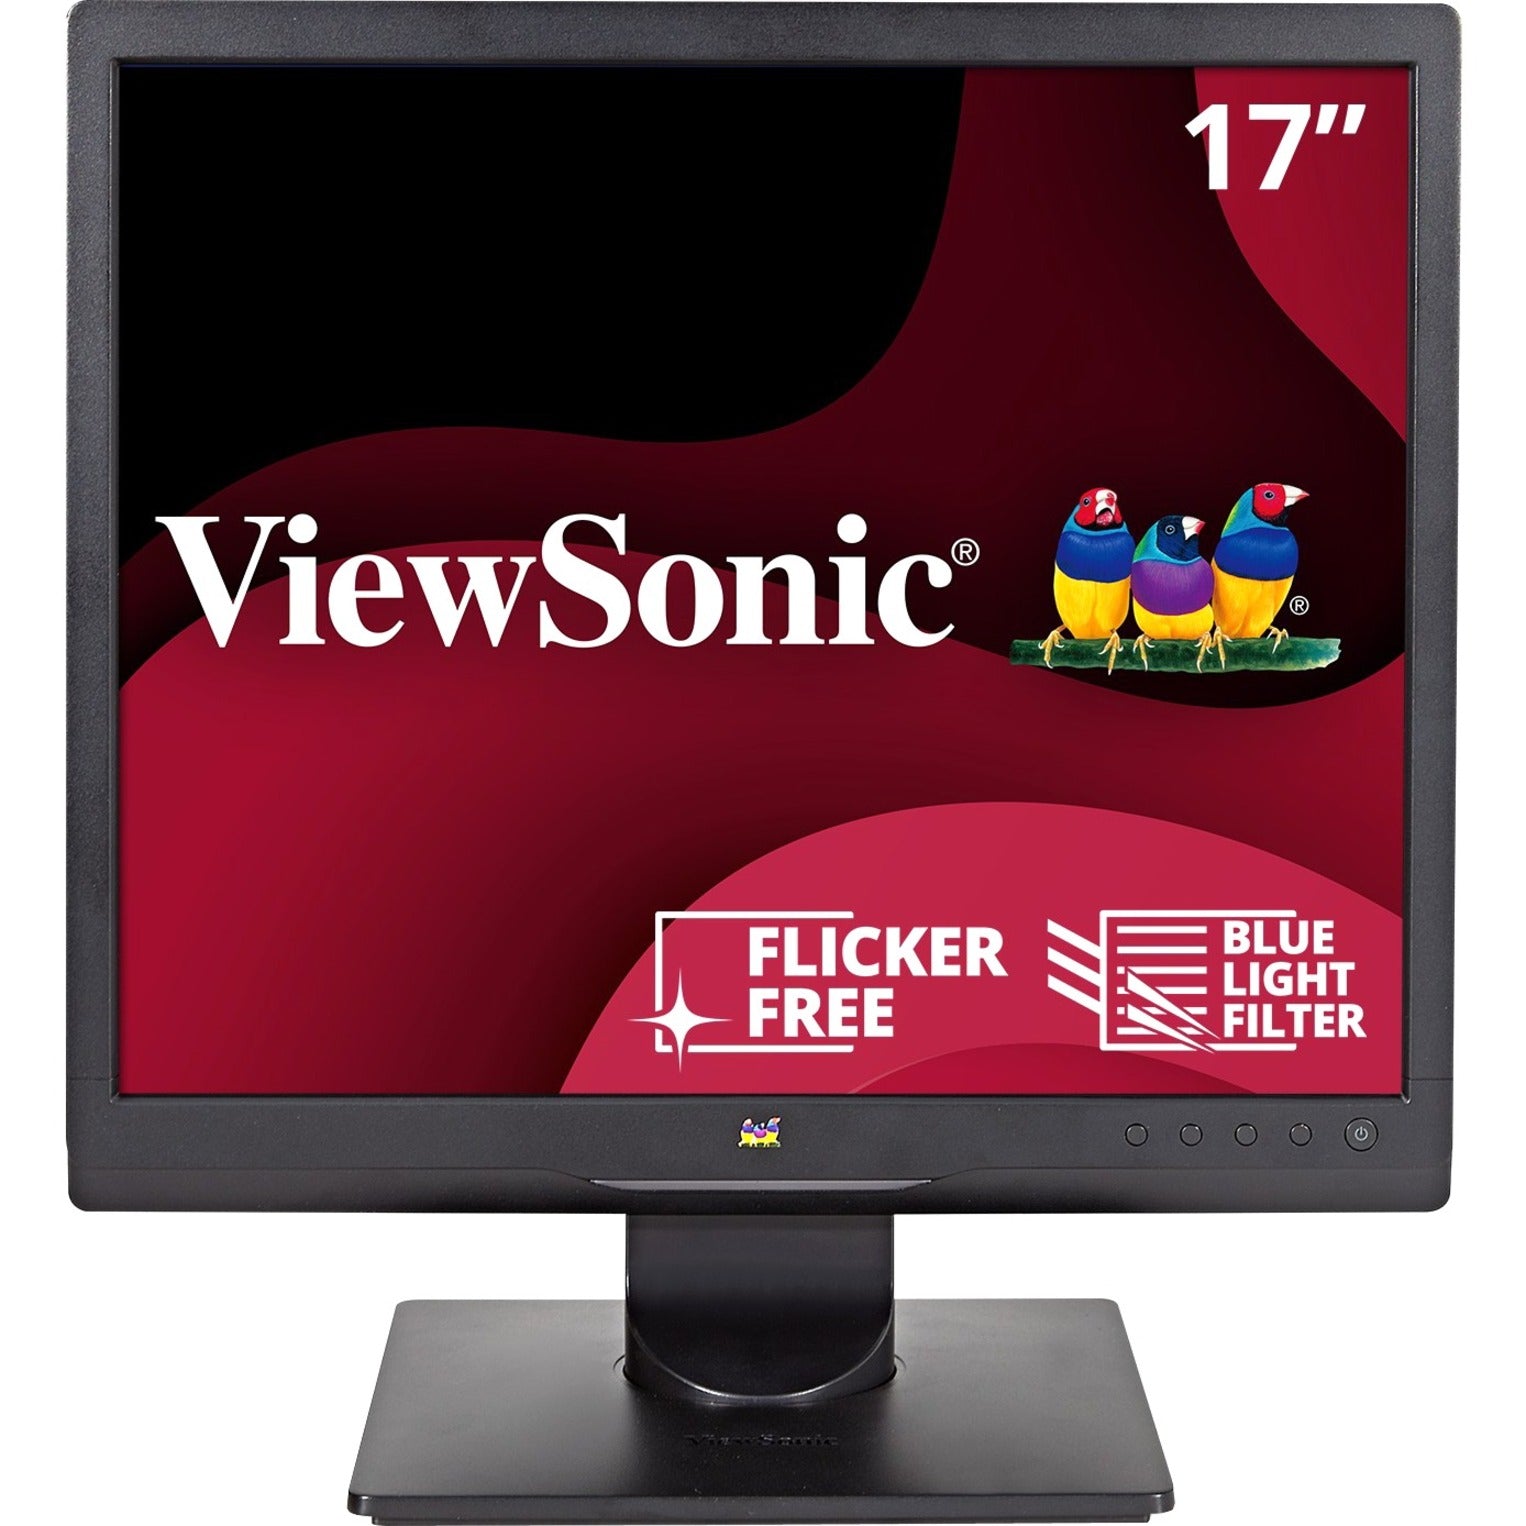 ViewSonic VA708A 17" LED Monitor, 1280x1024 Resolution, 3 Year Warranty, Energy Star Certified